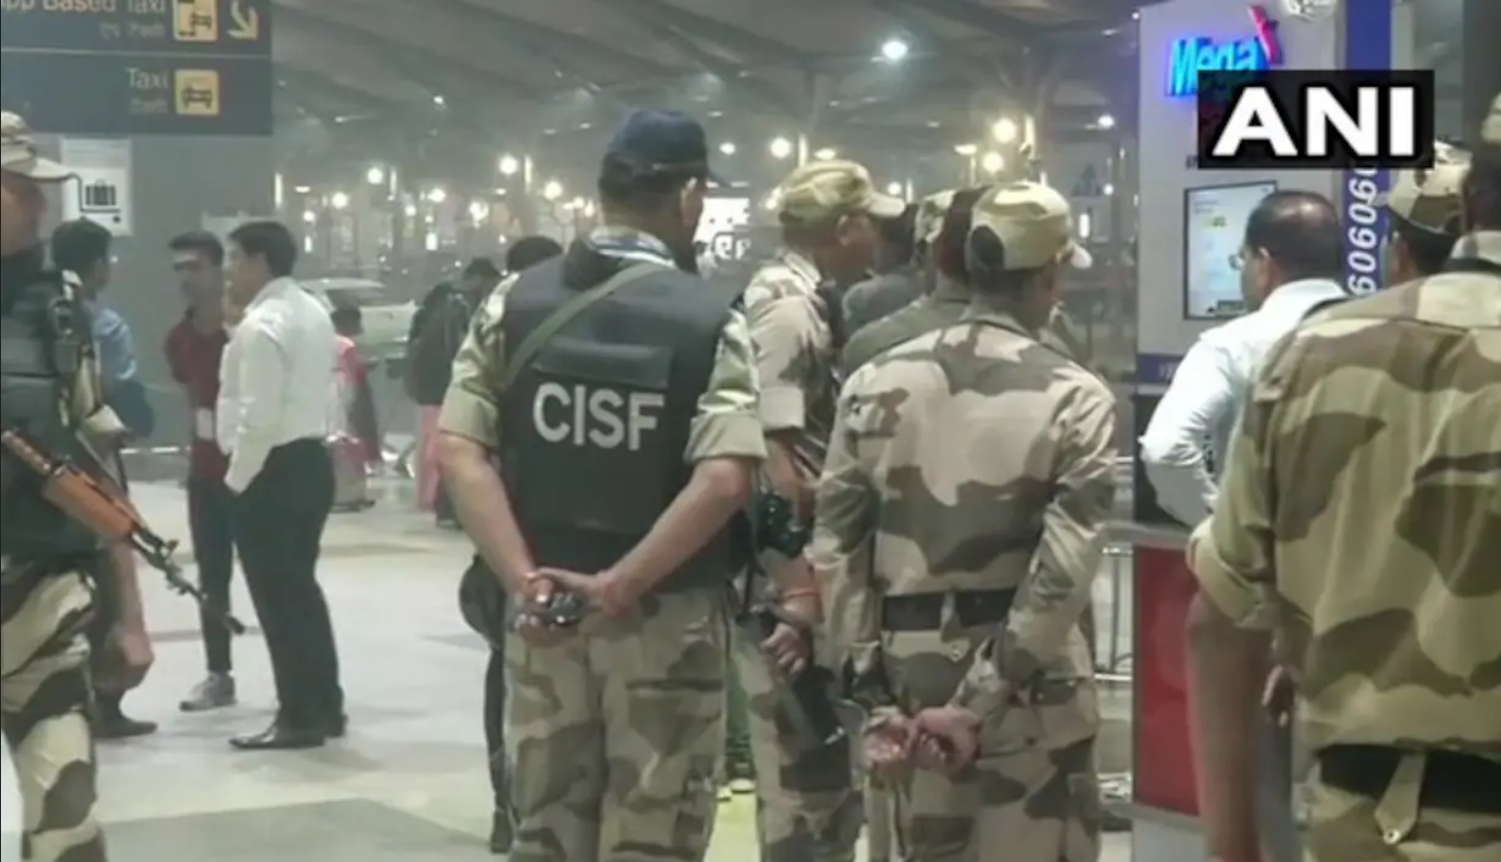 Hoax Social Media Bomb Threat At Delhi Airport Leads To Counter-Terror Security Drills